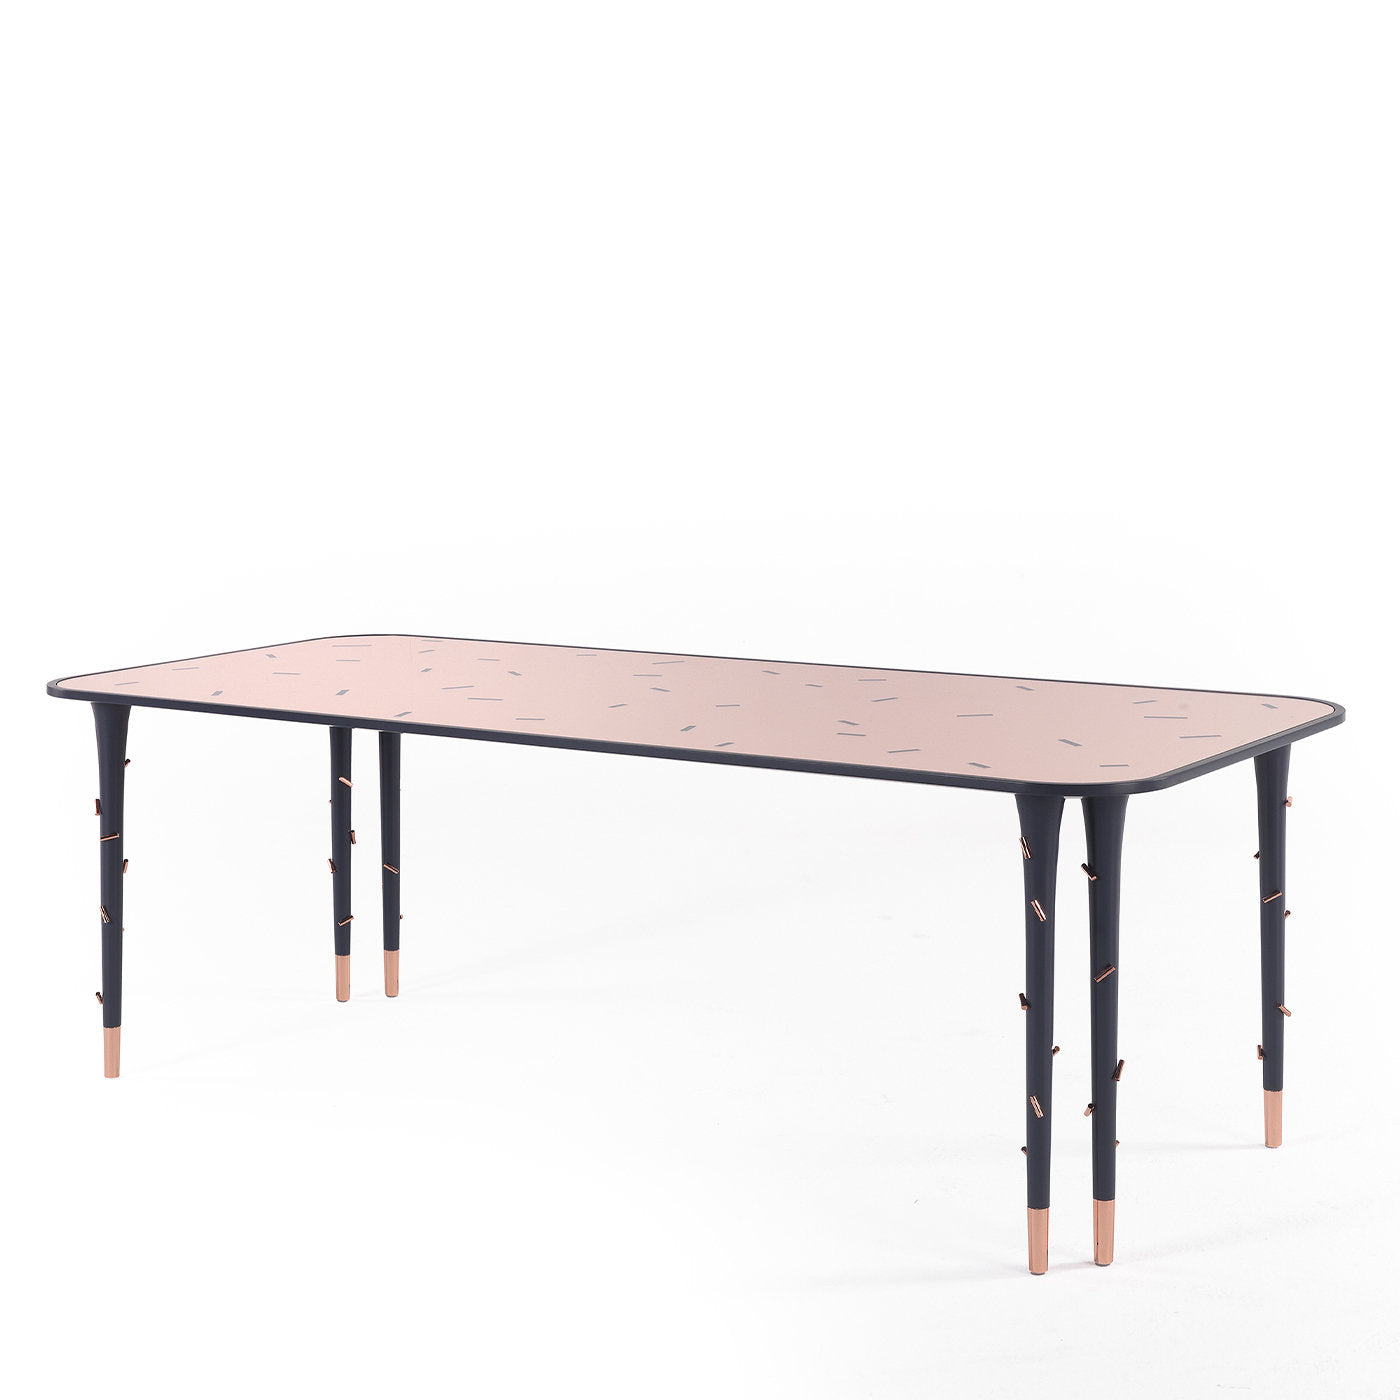 Mettic Dining Table by Matteo Cibic - Alternative view 4